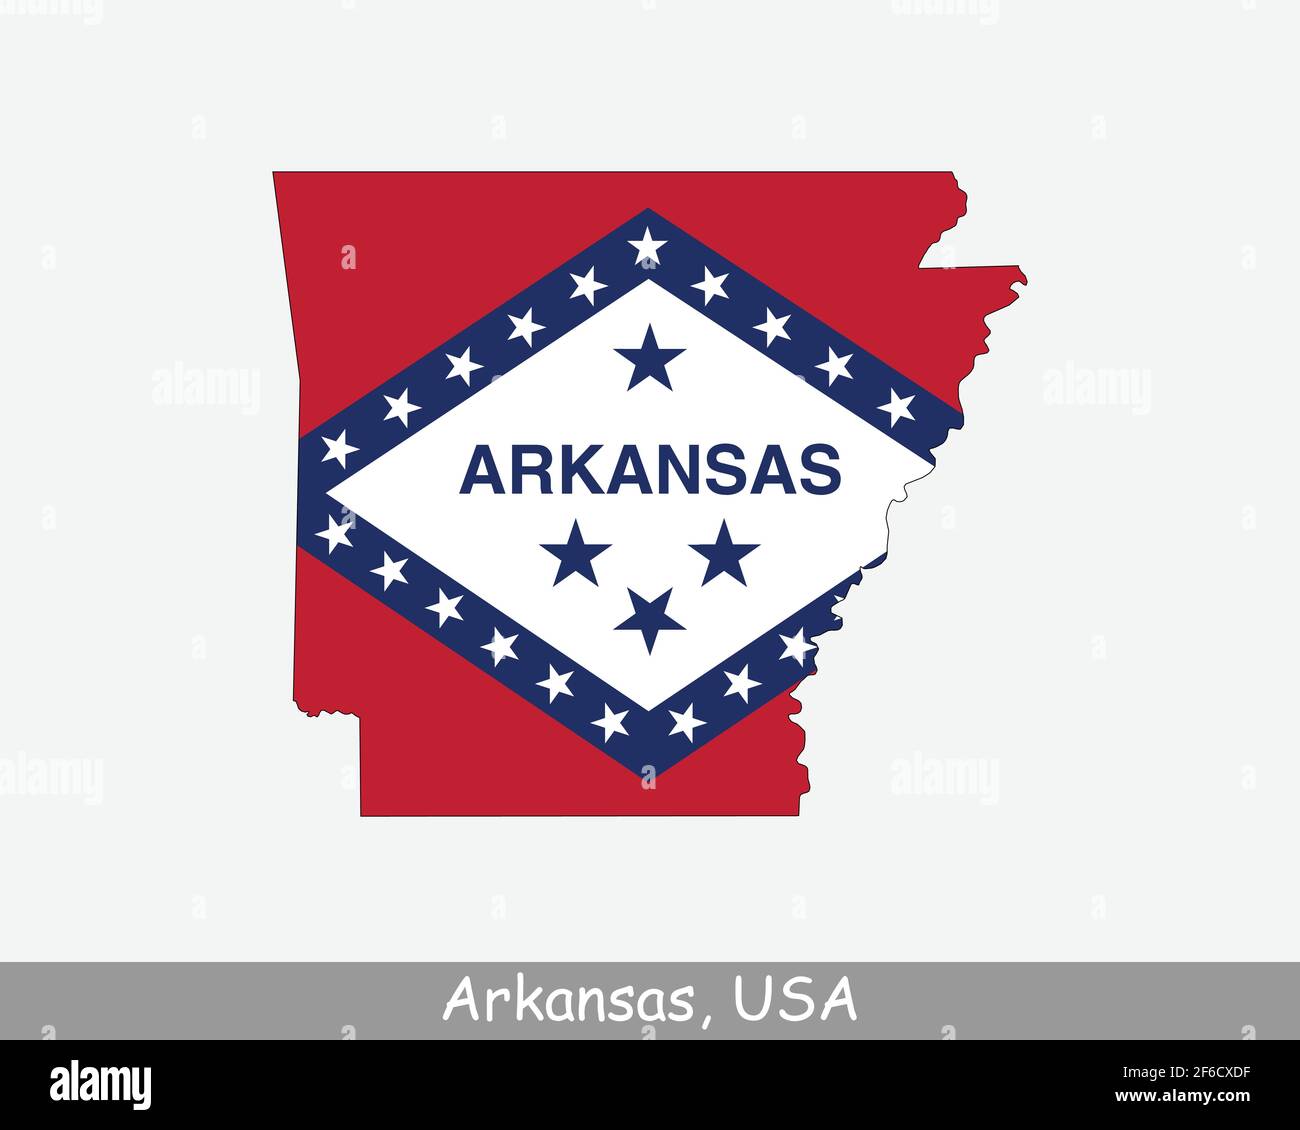 Arkansas Map Flag. Map of Arkansas, USA with the state flag of Arkansas isolated on white background. United States, America, American, United States Stock Vector